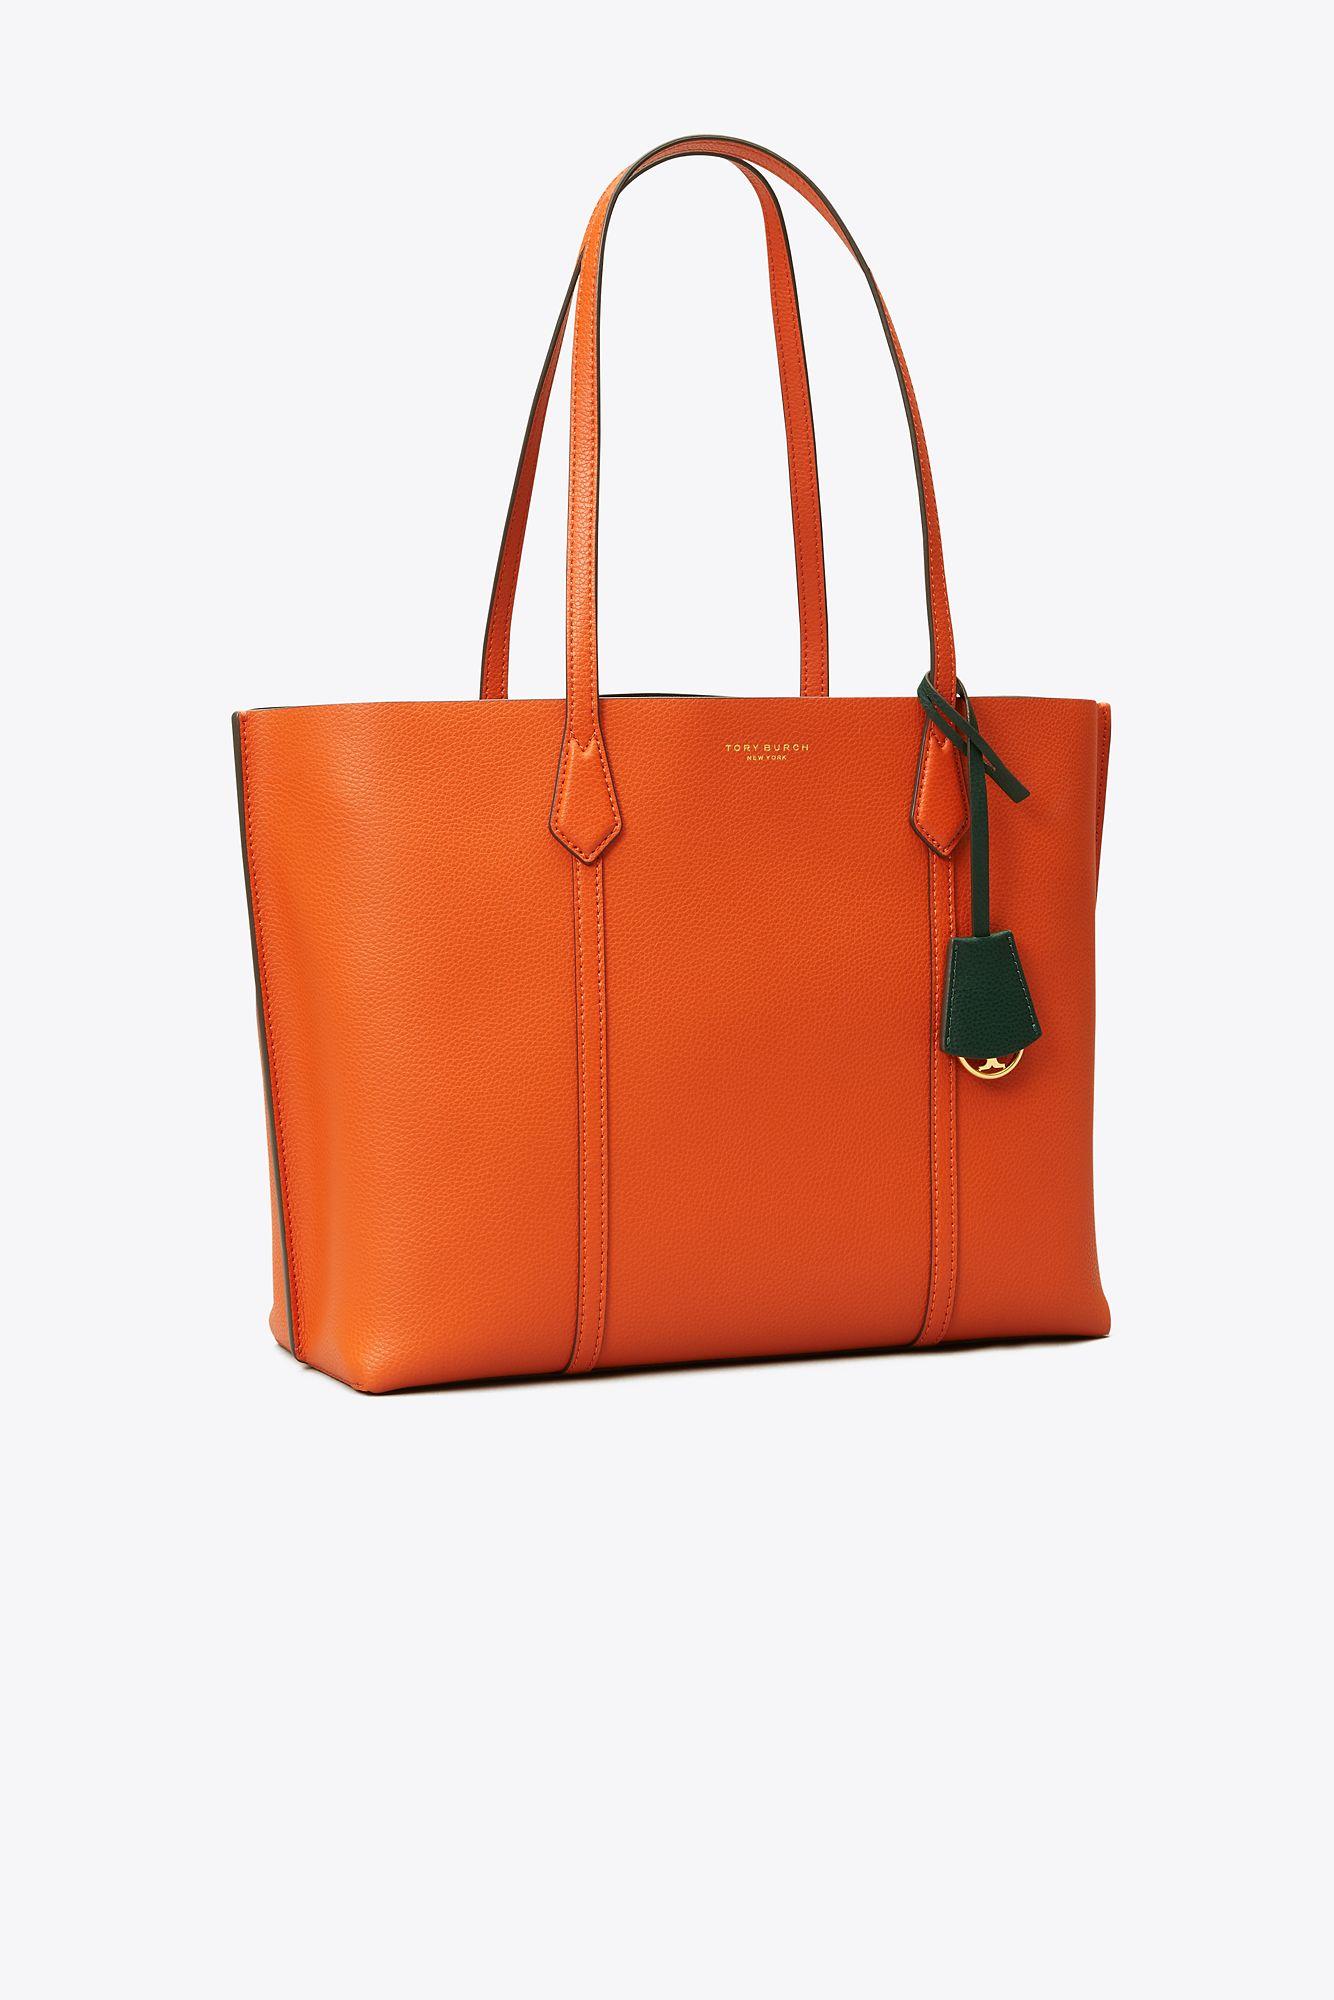 Tory Burch Perry Leather Tote Bag in Orange - Save 50% - Lyst